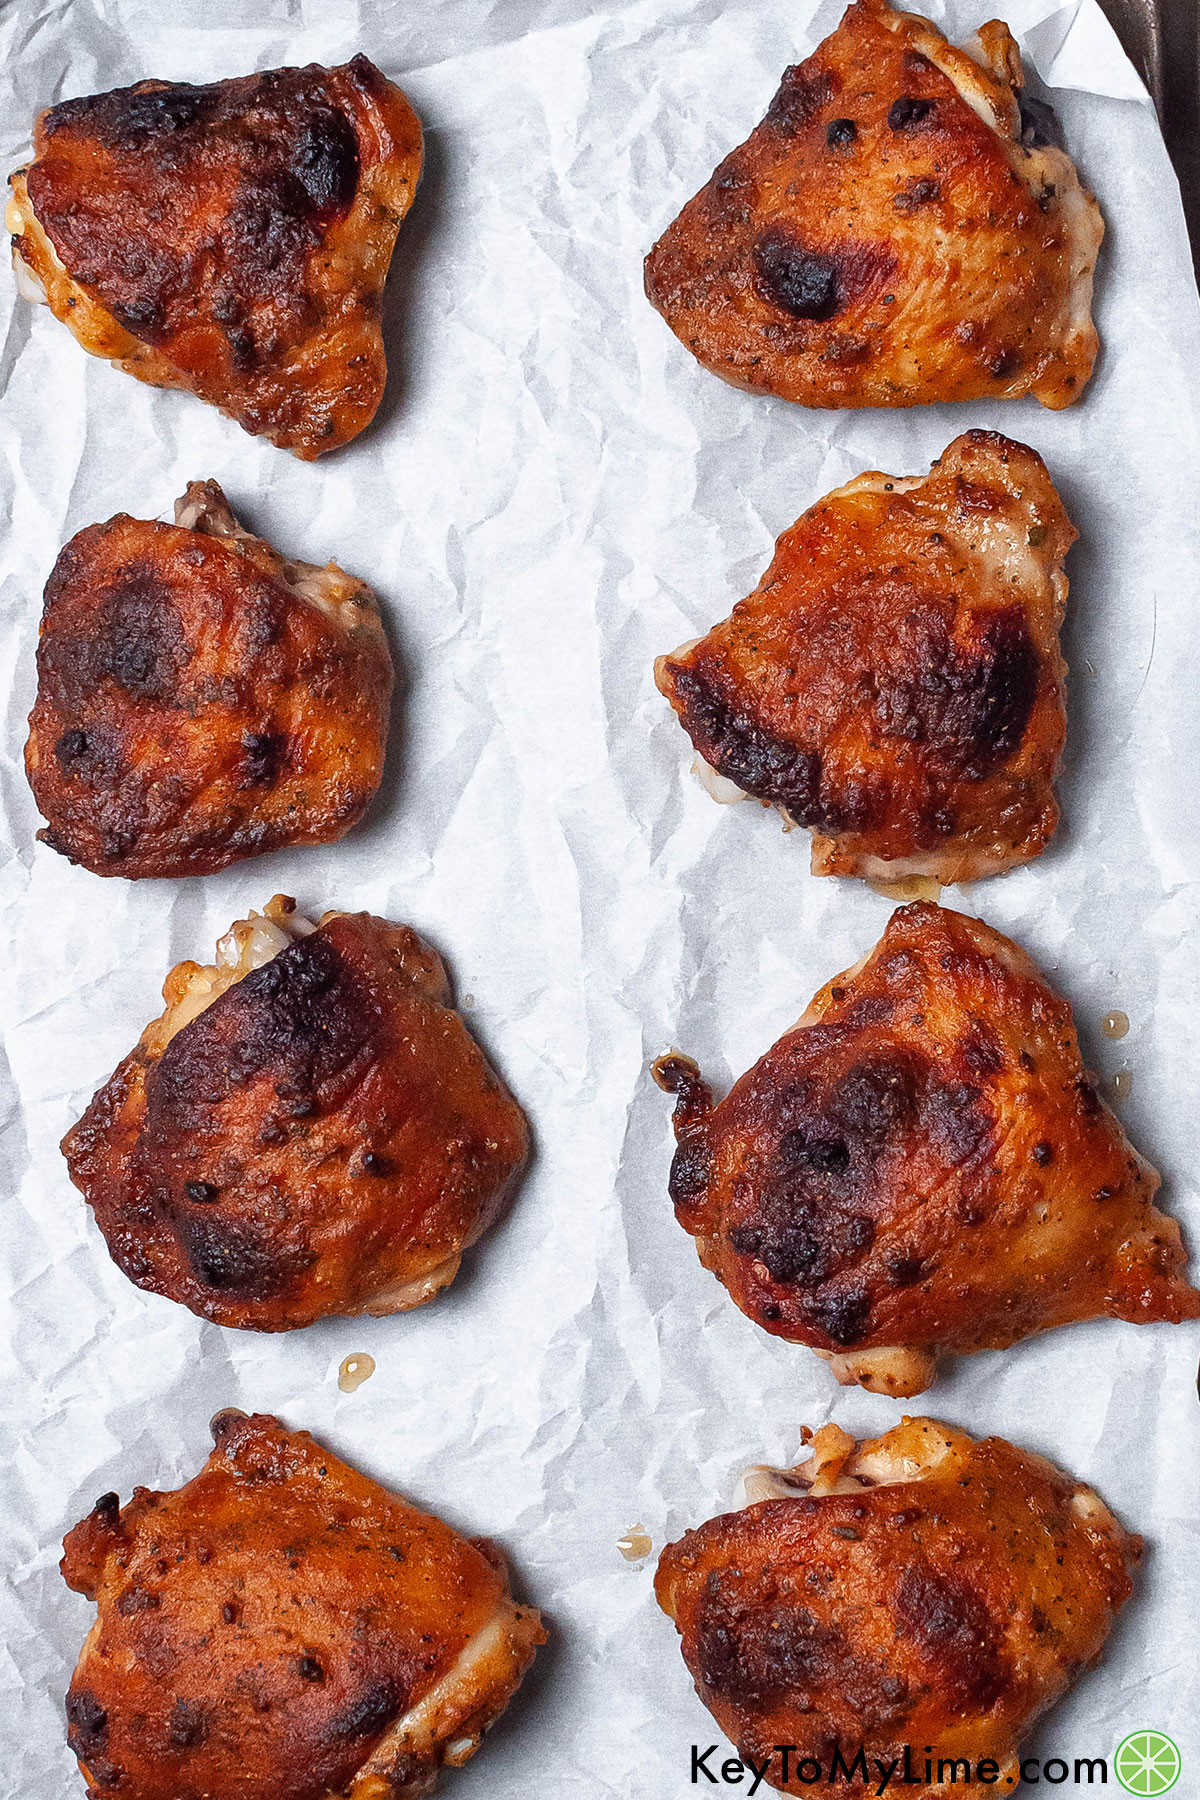 A couple of rows of chicken thighs on a parchment paper fresh out of the oven.